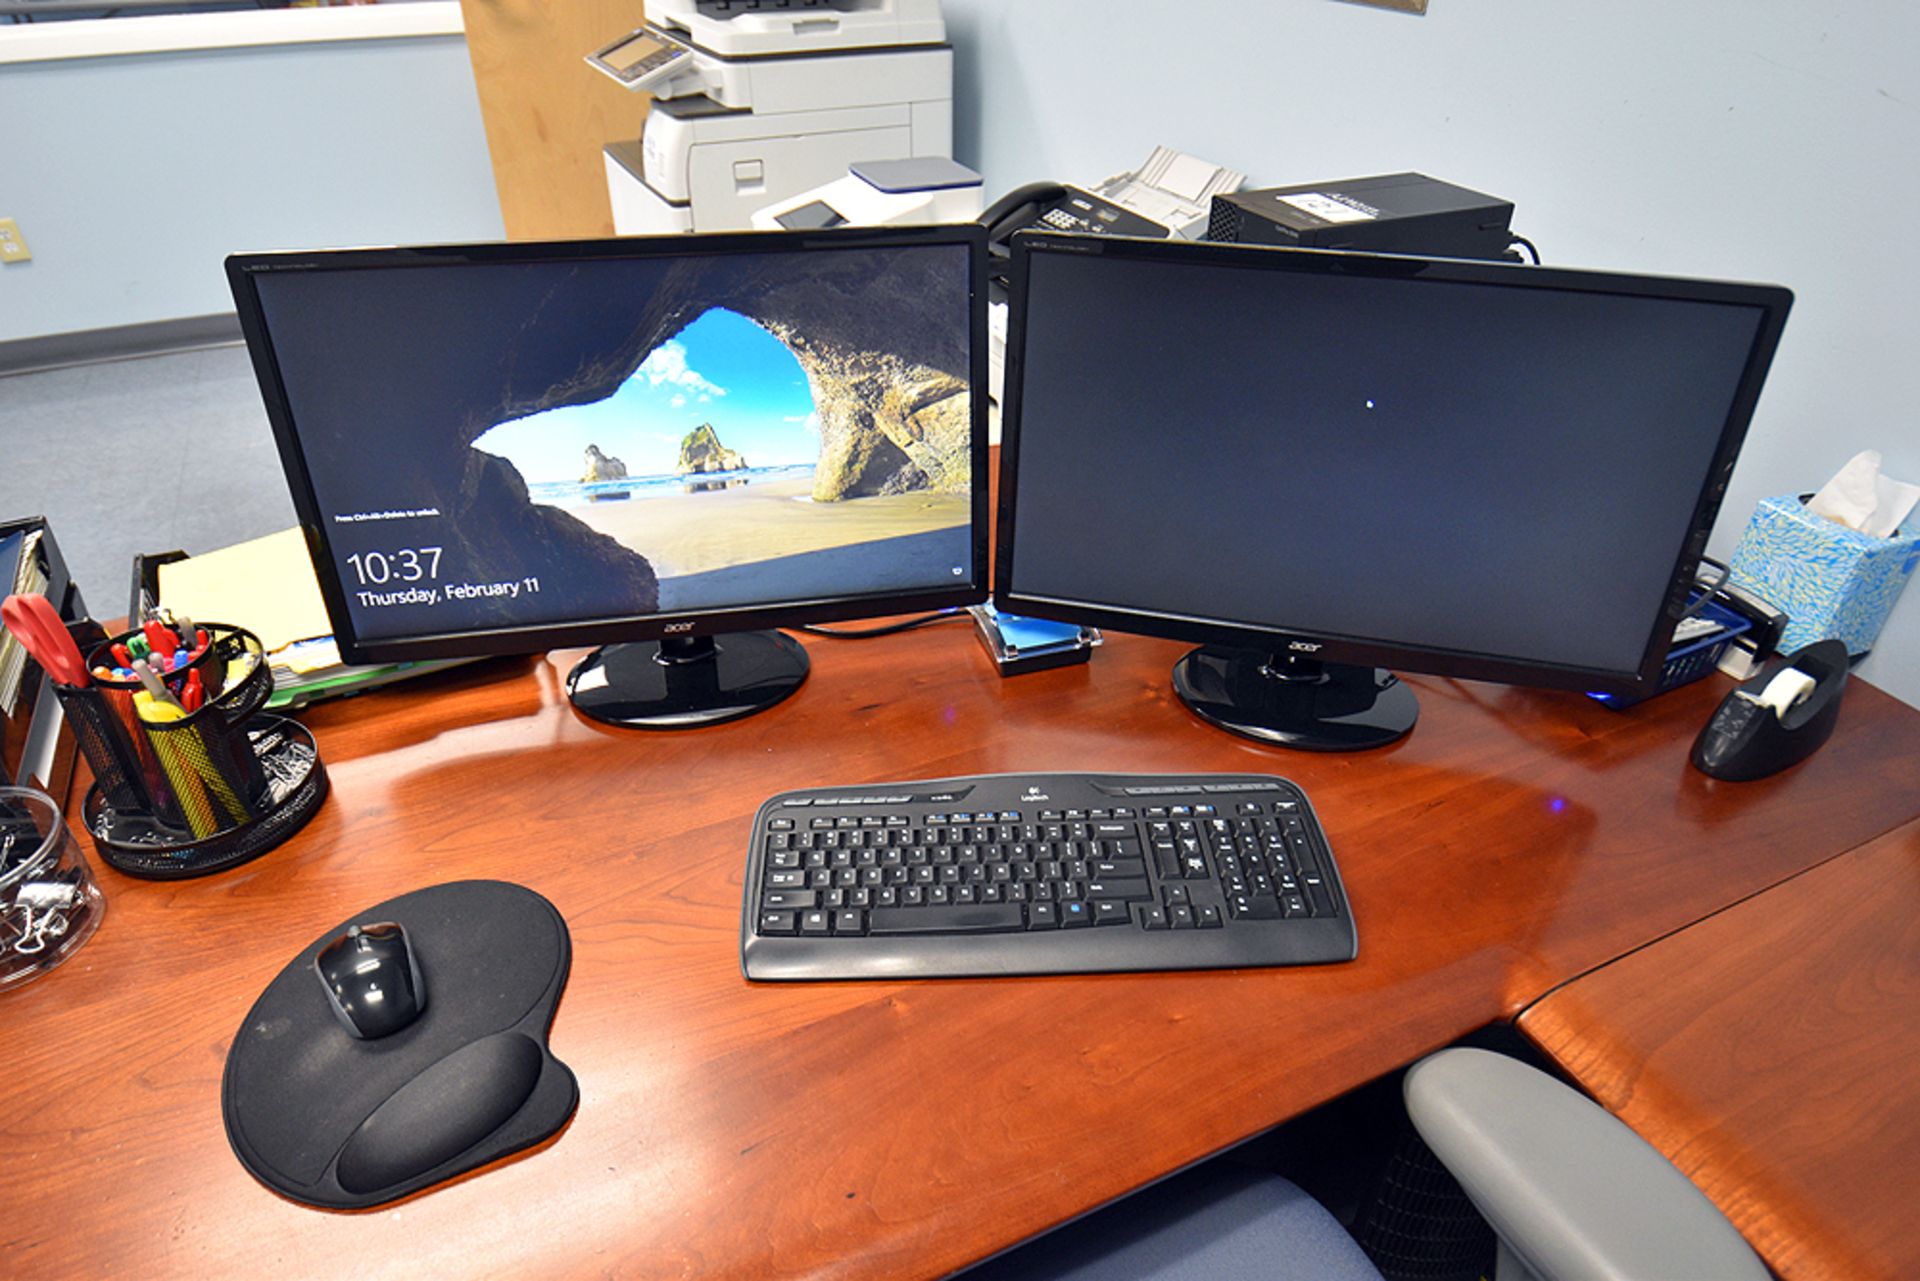 Dell OptiPlex 5040 i7 PC w/ (2) Acer 24" Monitors, Keyboard and Mouse